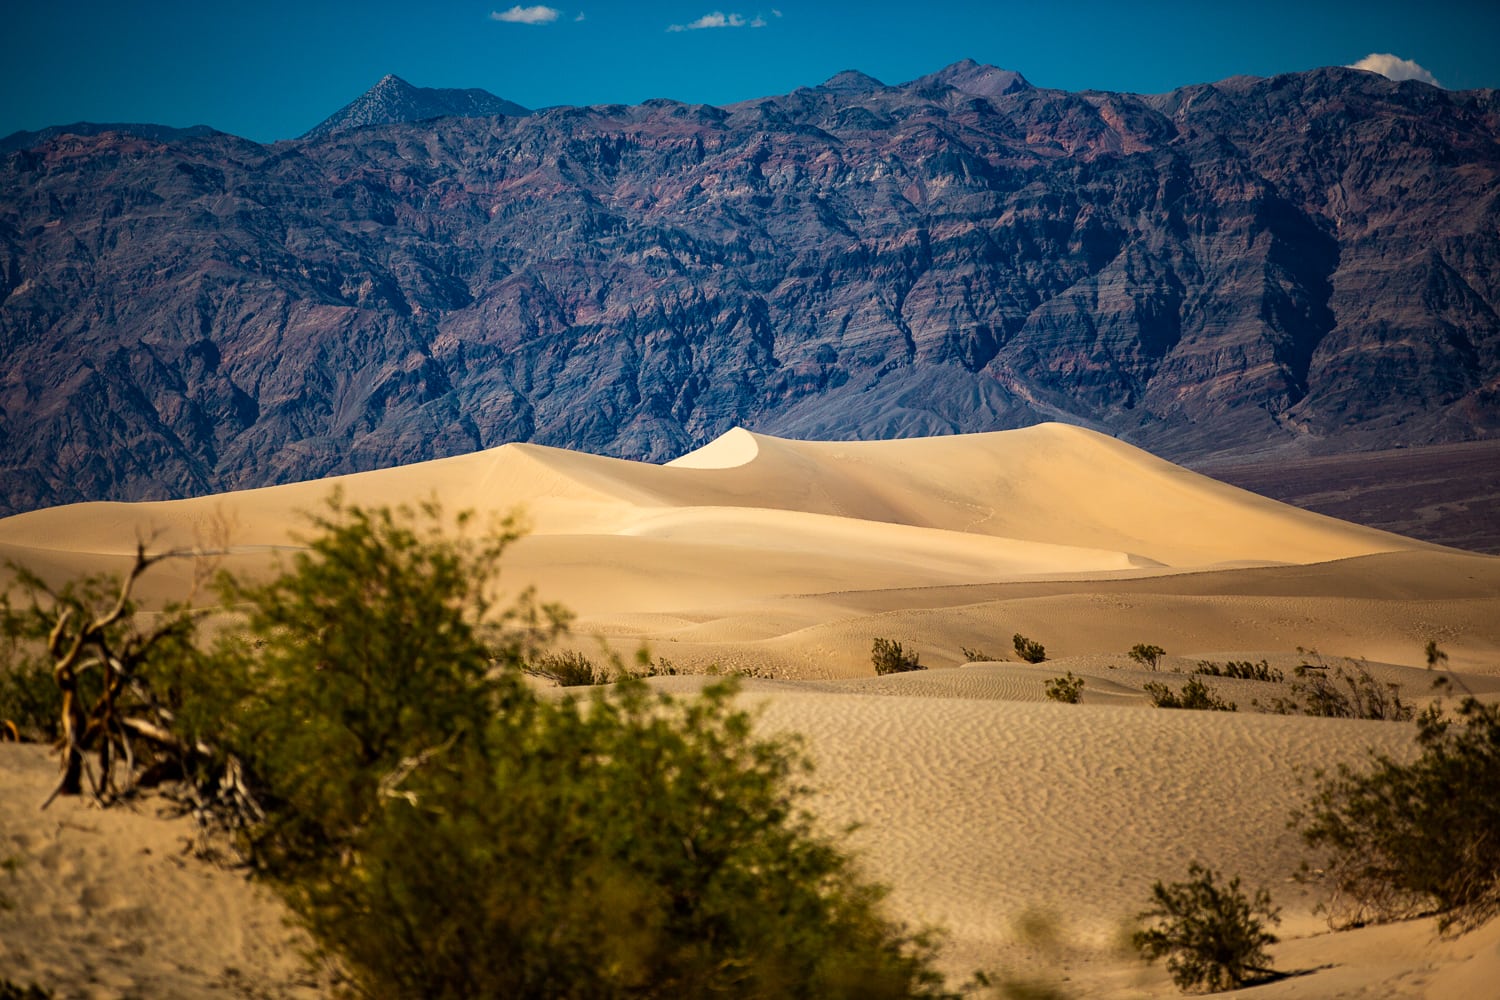 Sand dune peaks in Death Valley against jagged mountains.